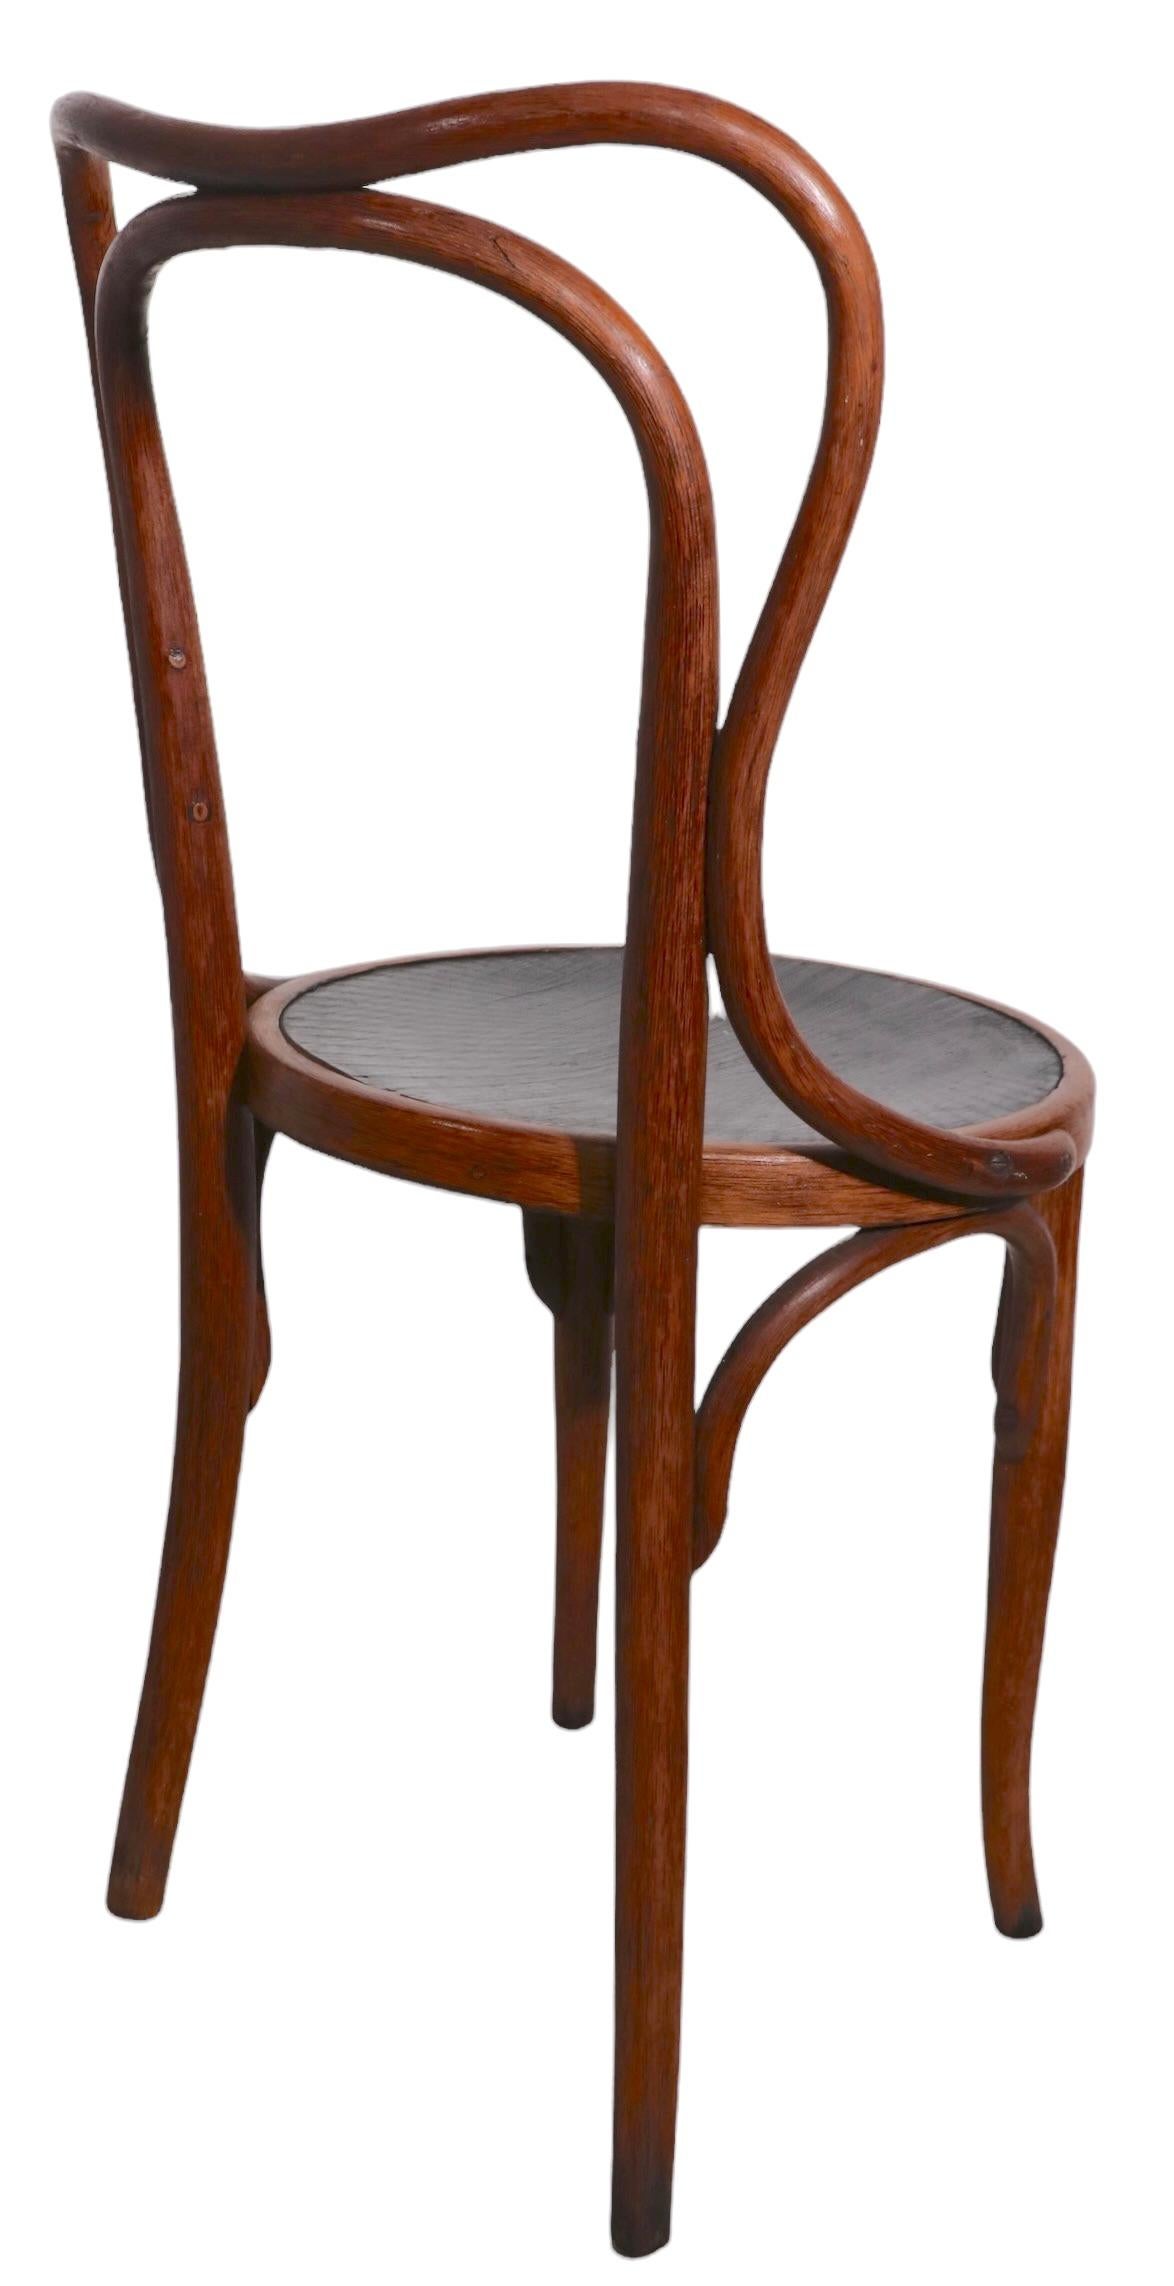 One of the more successful designs produced by J J Kohn, this chair is an early example of the Vienna Secessionist School of early modern design, produced in Austria. This example is in very fine, original, untouched condition, free of damage, or